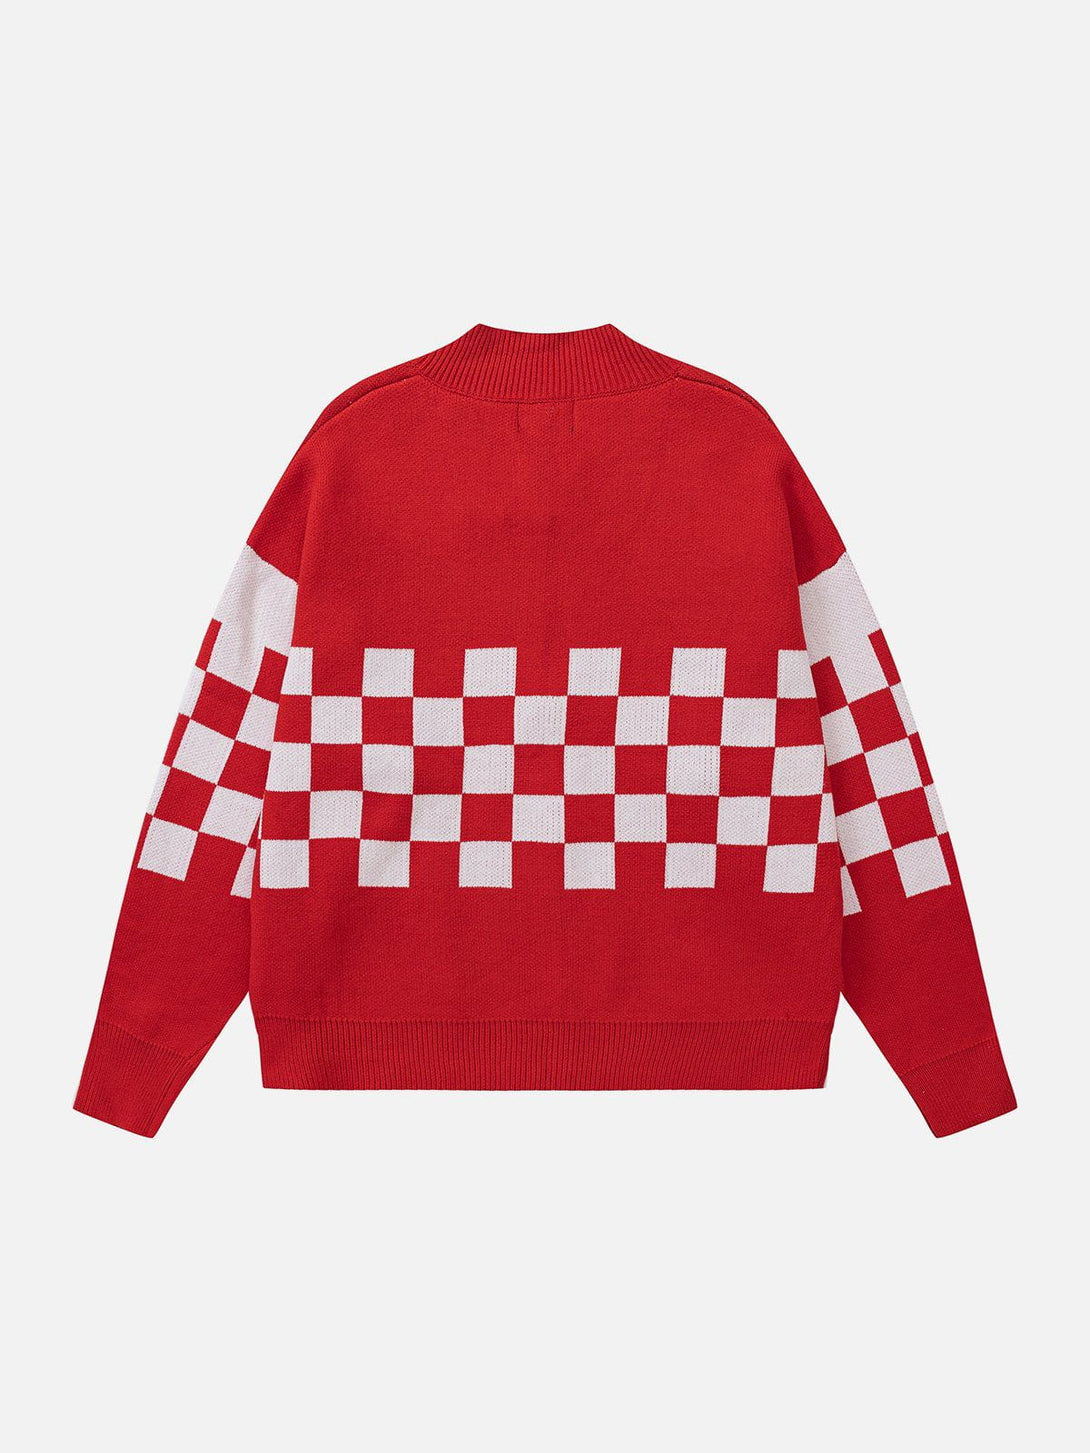 Levefly - Plaid With Gloves Racing Cardigan - Streetwear Fashion - levefly.com